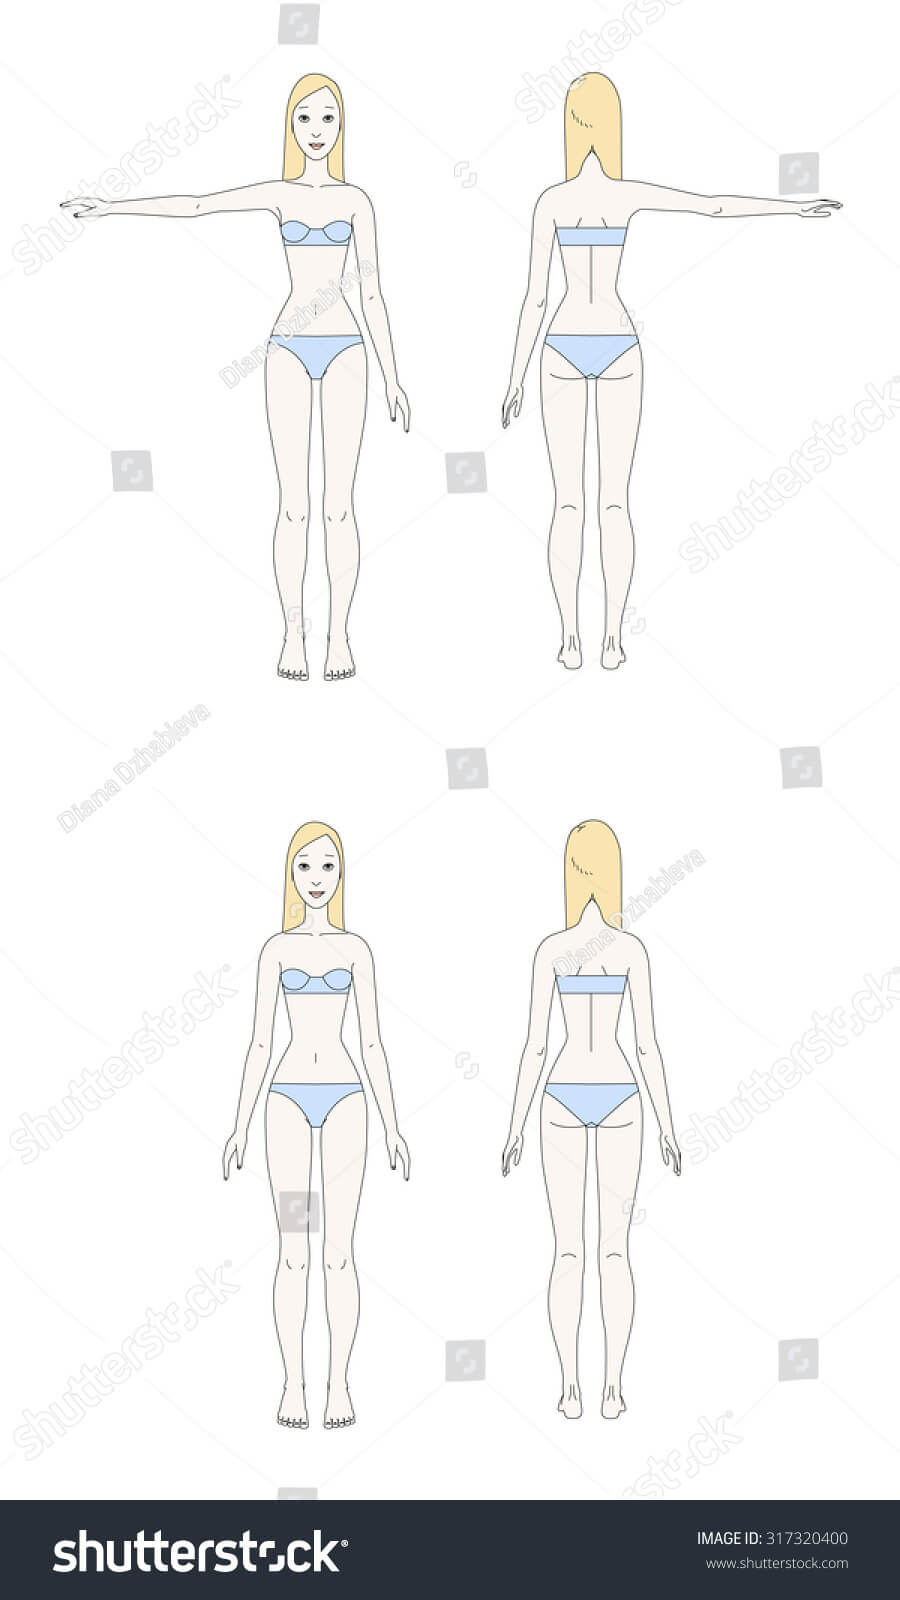 Triggerfingerstitching.blogspot: Female Body Template With Blank Body Map Template